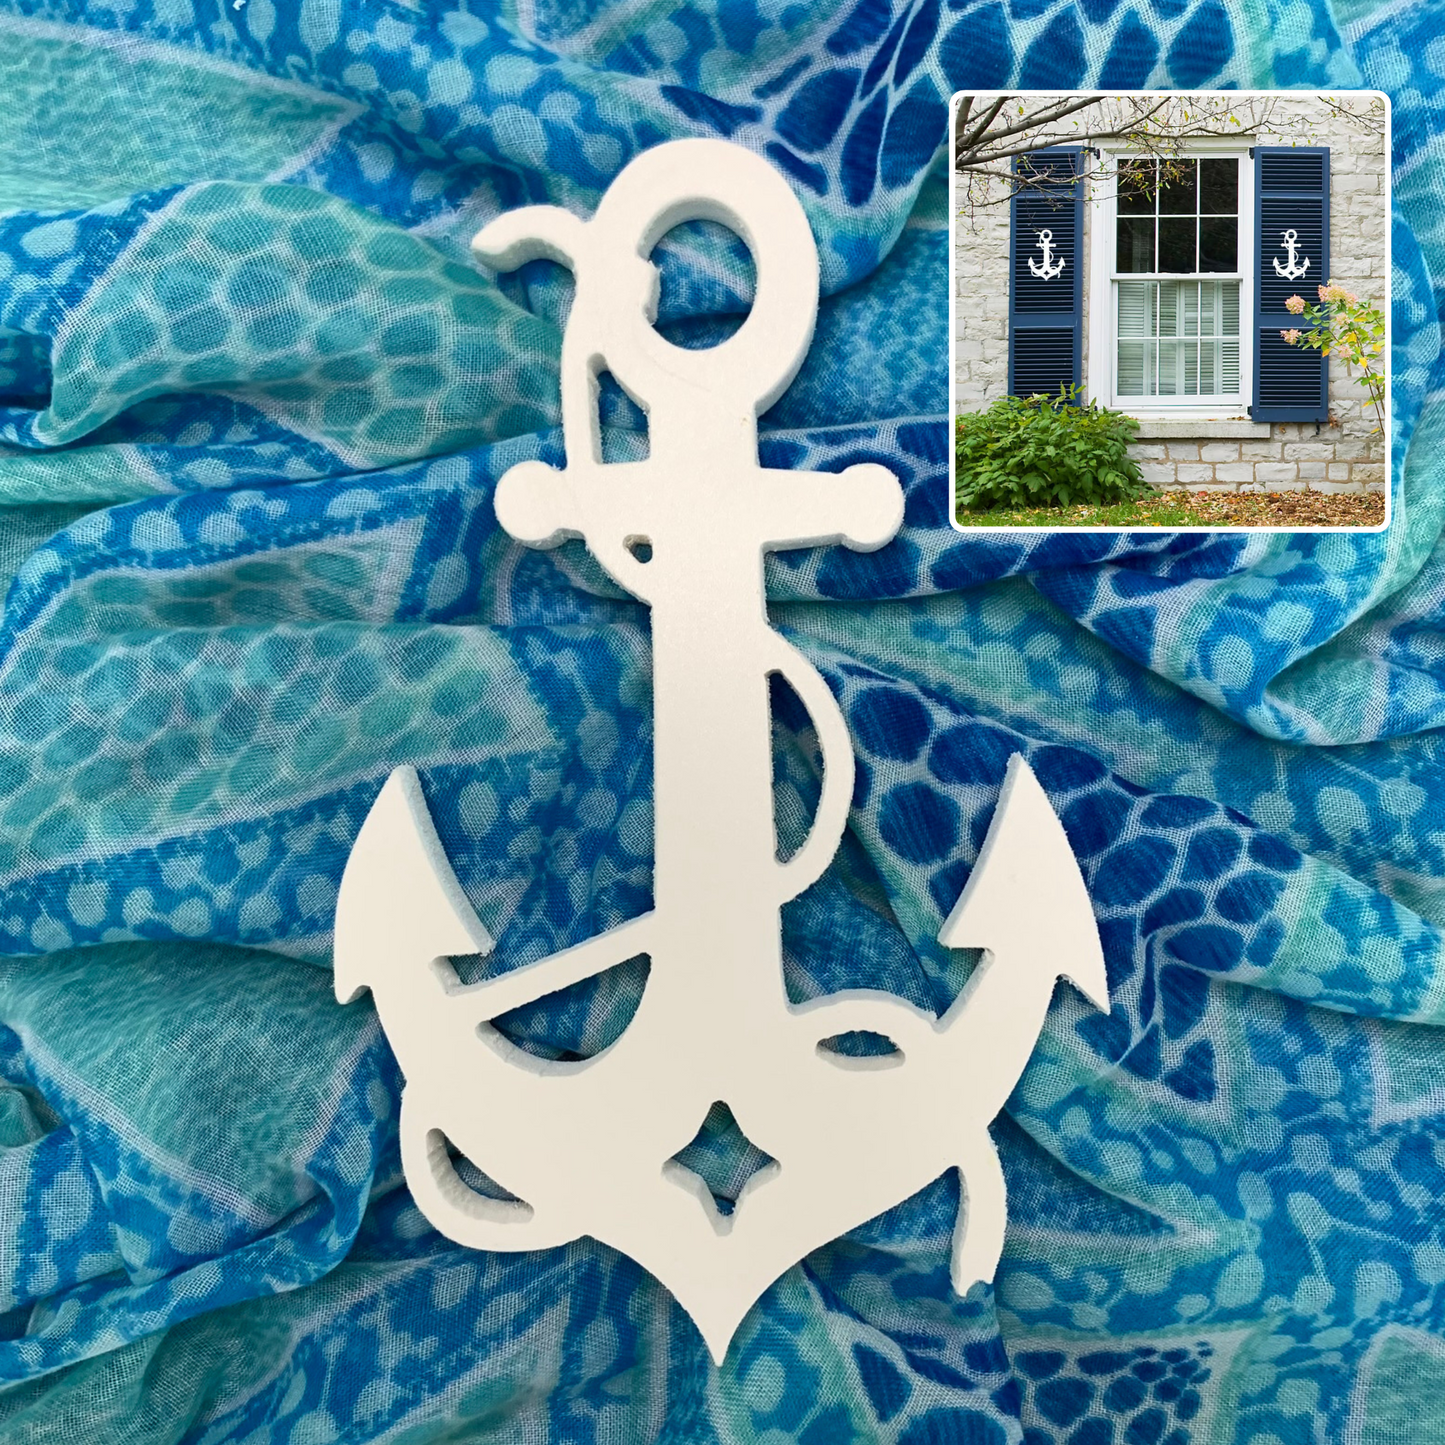 Shutter Embellishments - Anchor with Rope Wall Art Small approx 8" x 5", Custom, Outdoor Decor, Coastal, Tropical, Ships Free to Mainland USA